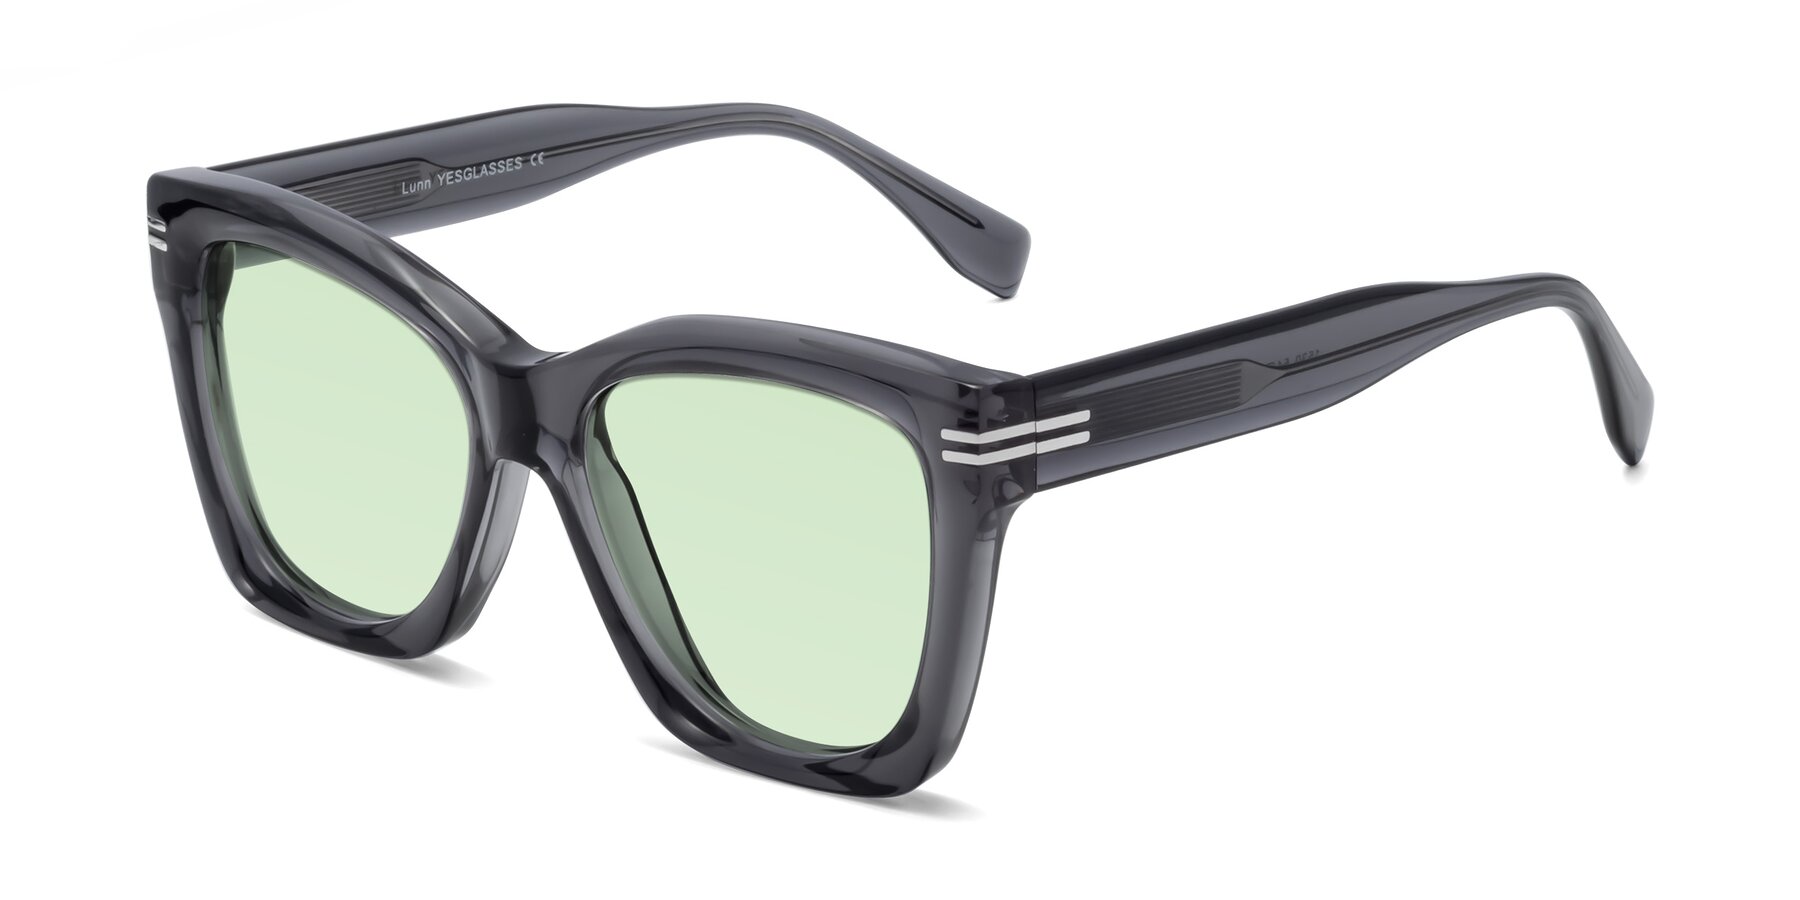 Angle of Lunn in Translucent Gray with Light Green Tinted Lenses